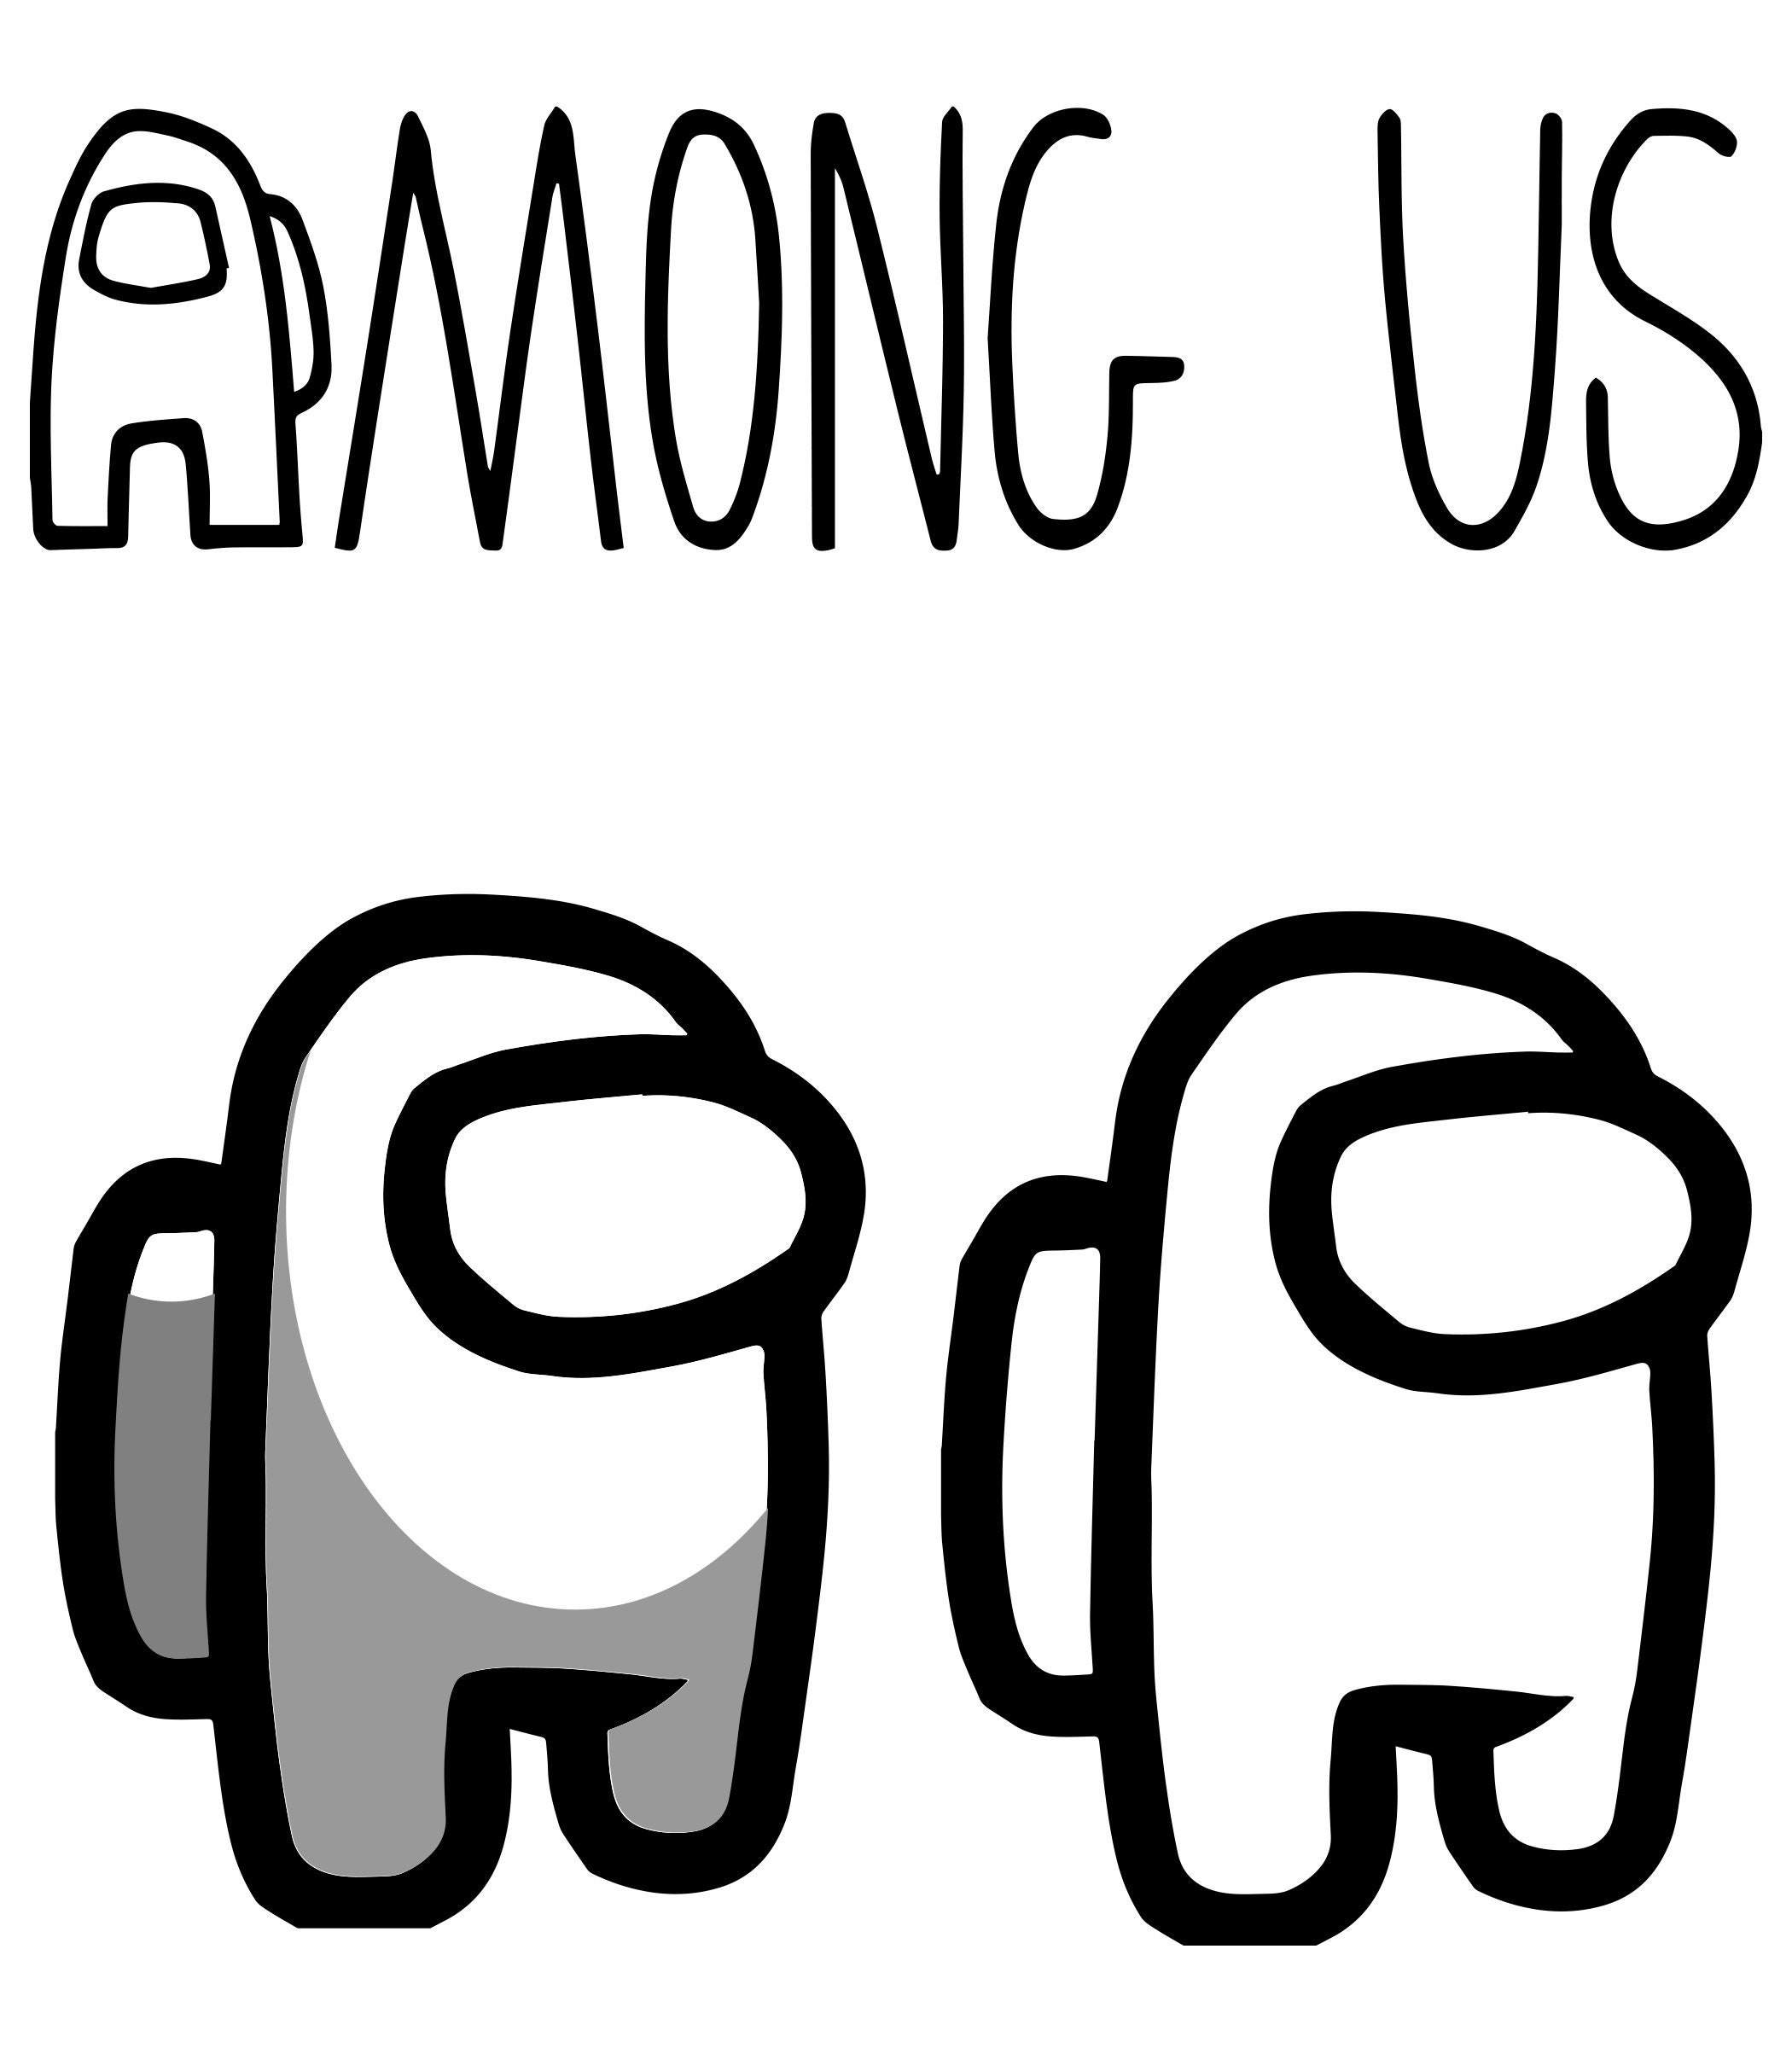 Among Us Logo, meaning, history, PNG, SVG, vector